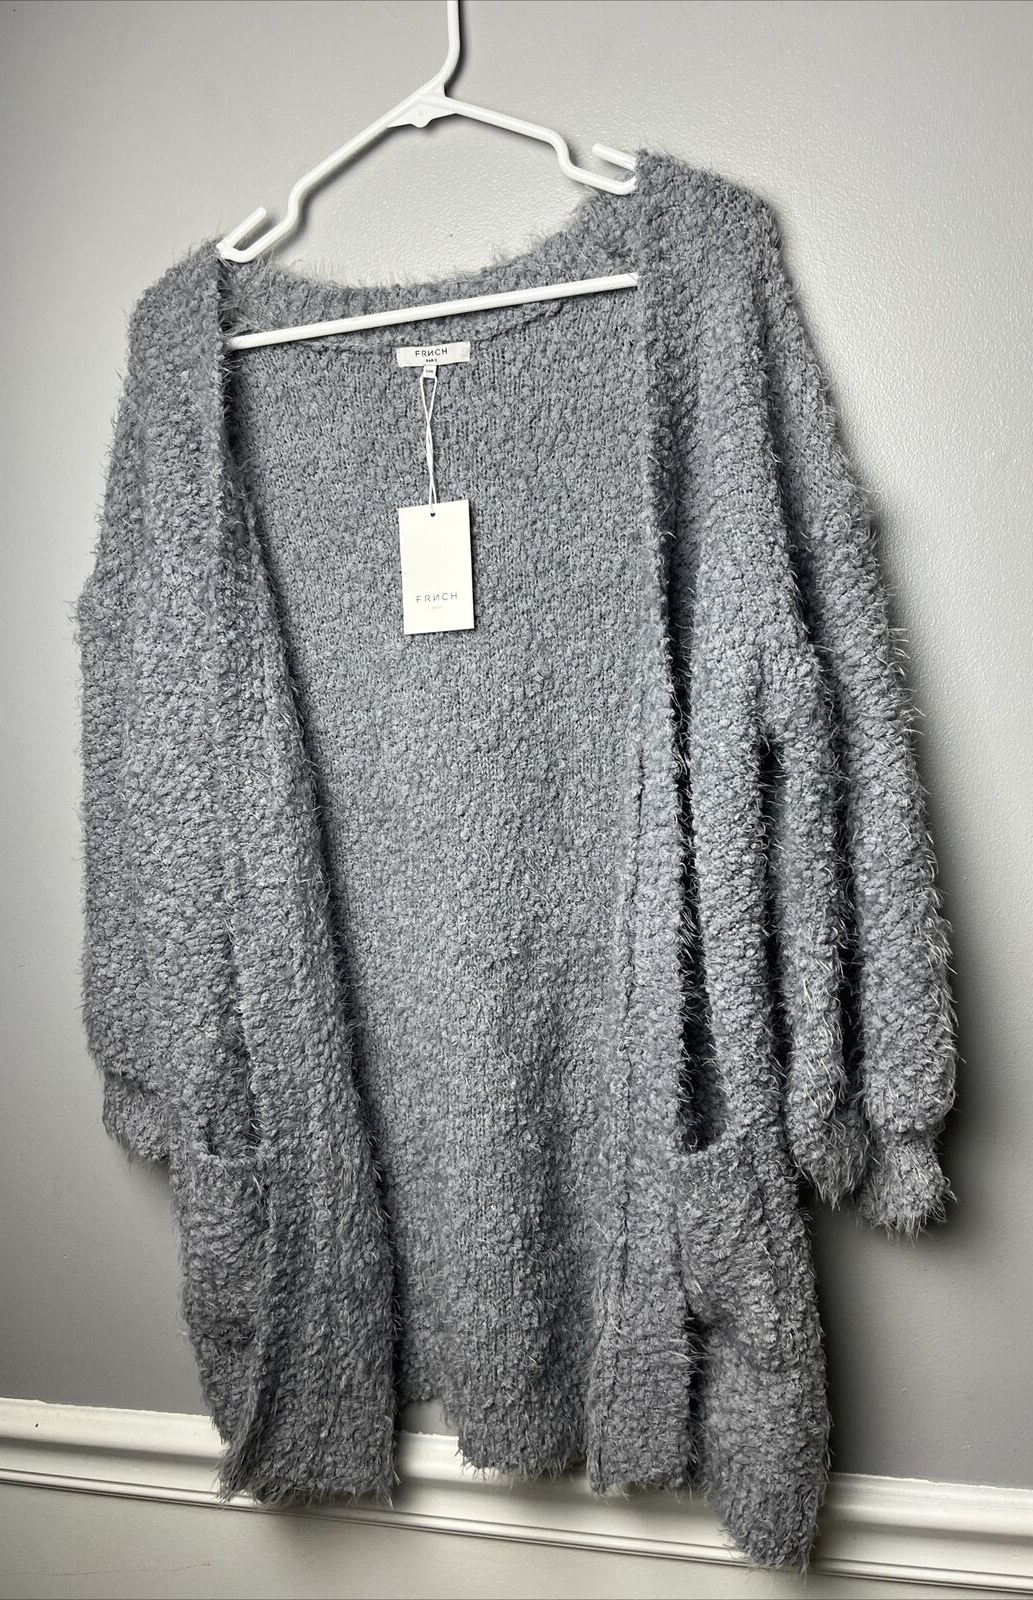 FRNCH Size S/M Soft Eyelash Boucle Knit Cardigan Gray Open Front Sweater - New